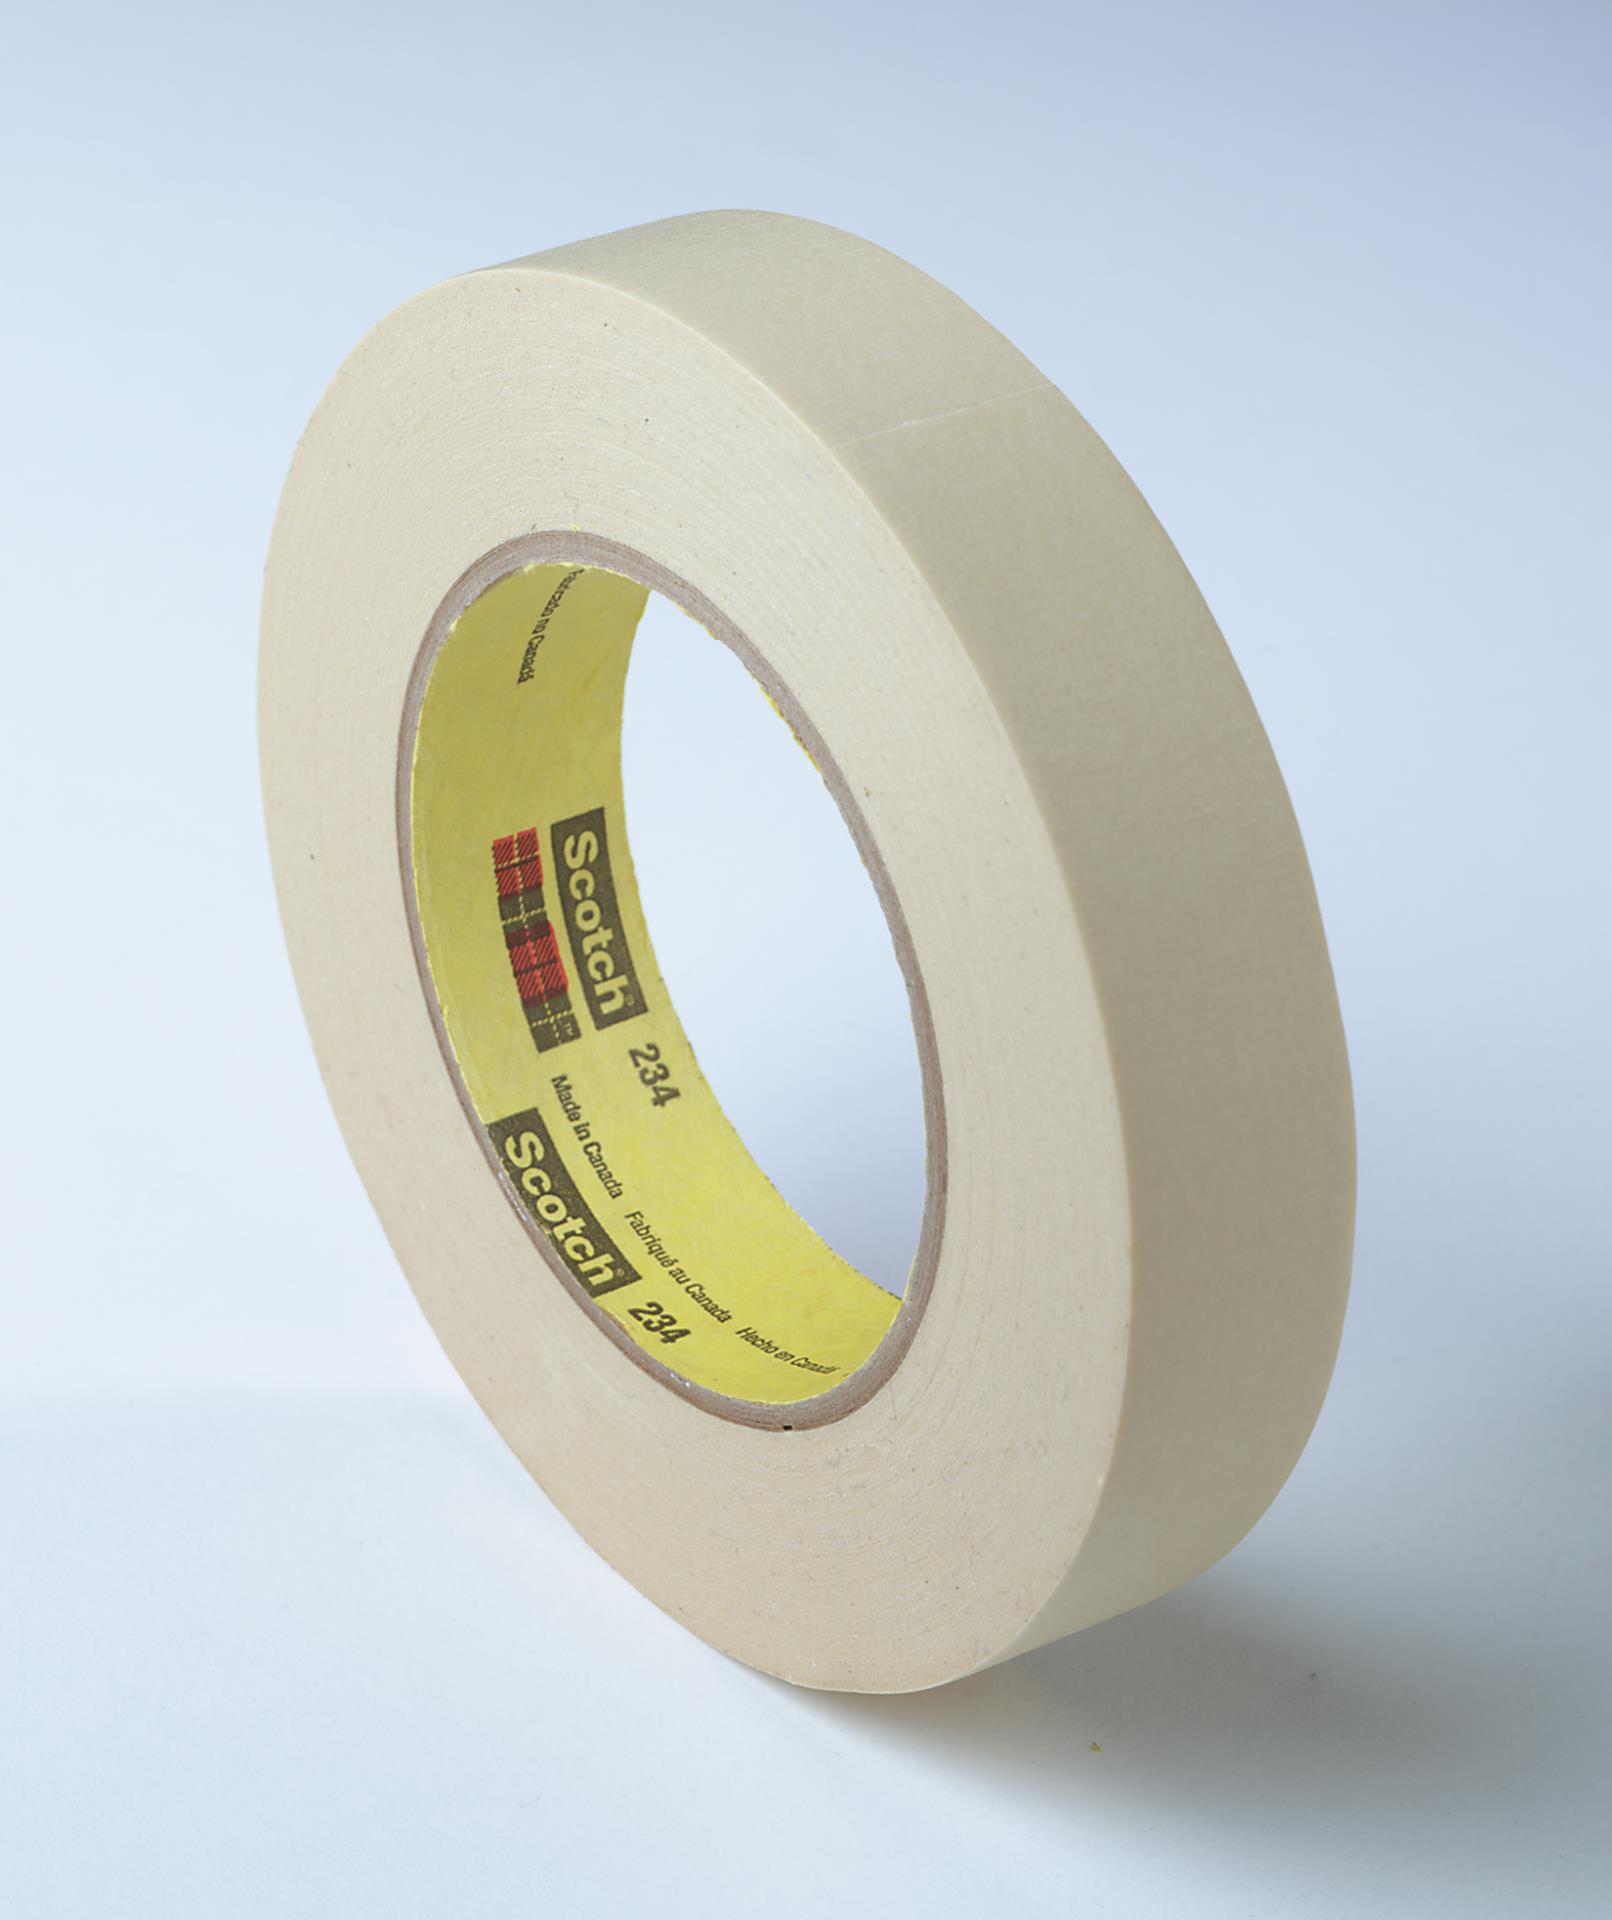 60 yds /roll Case of 72 Rolls WOD Masking Tape 1/2 inch for General Purpose 